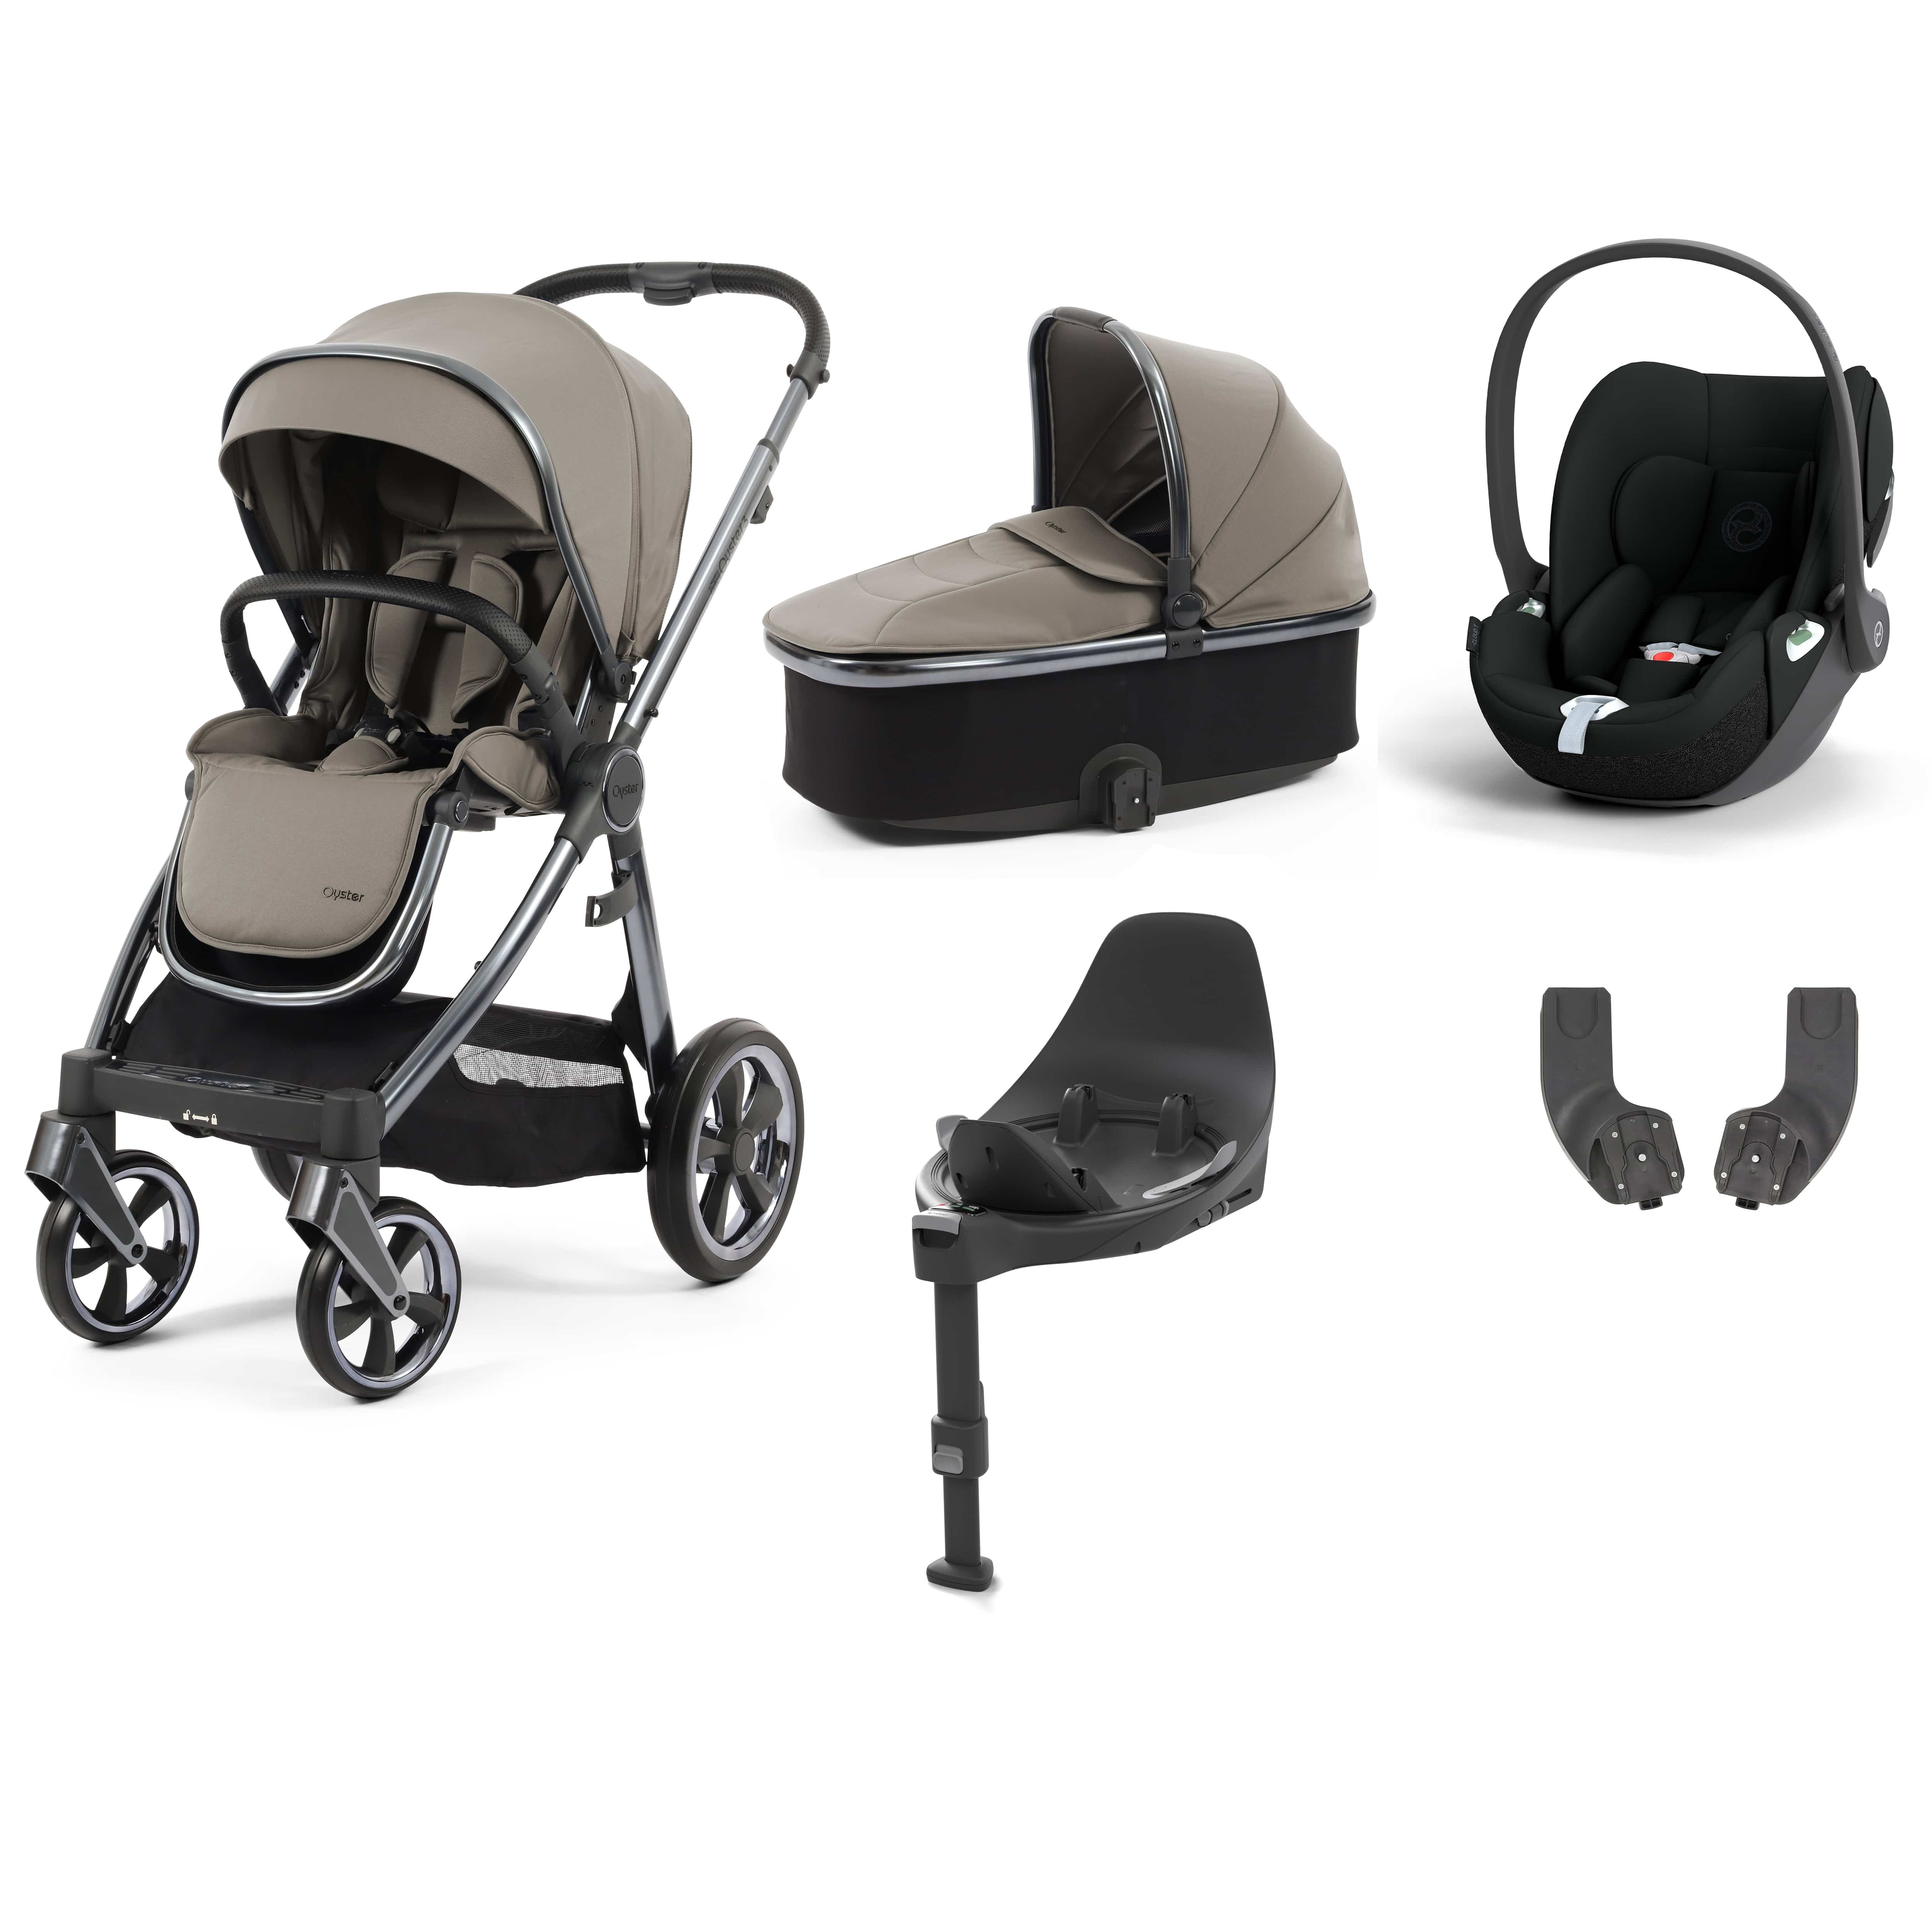 BabyStyle travel systems Babystyle Oyster 3 Essential Bundle with Car Seat - Stone 14753-STN